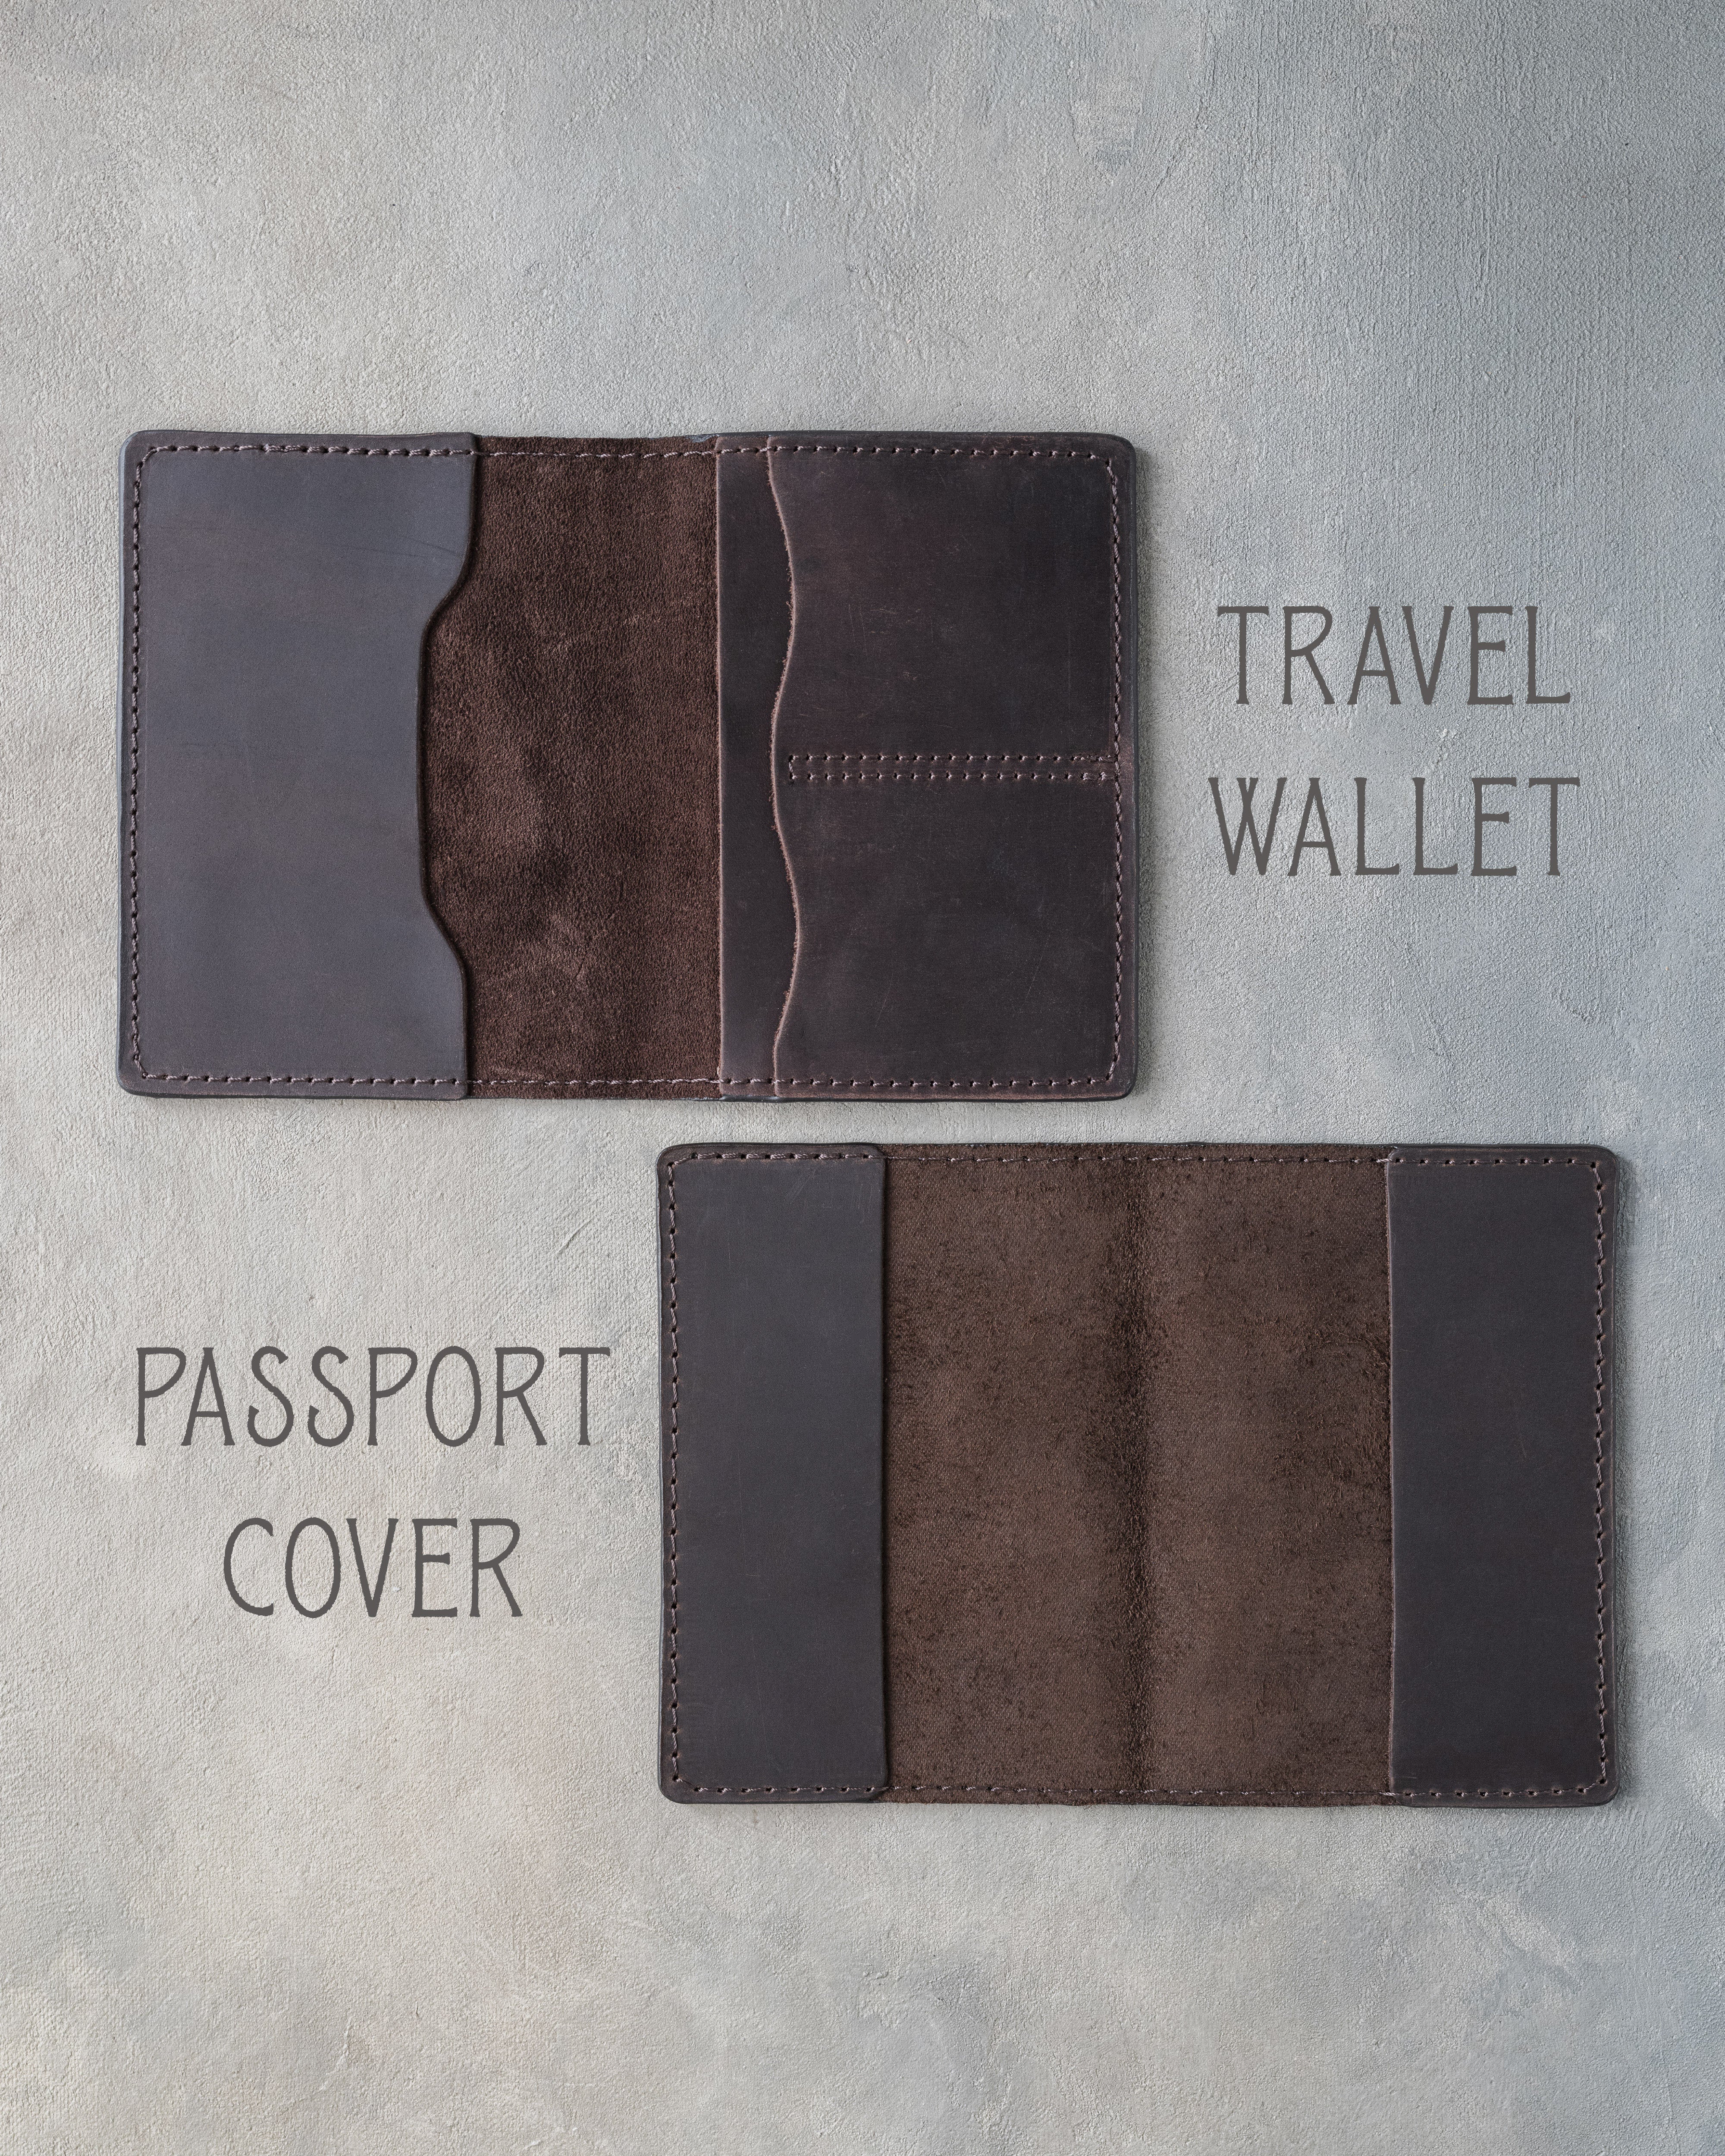 Personalized Passport Cover / Travel Wallet In Country Gray Leather